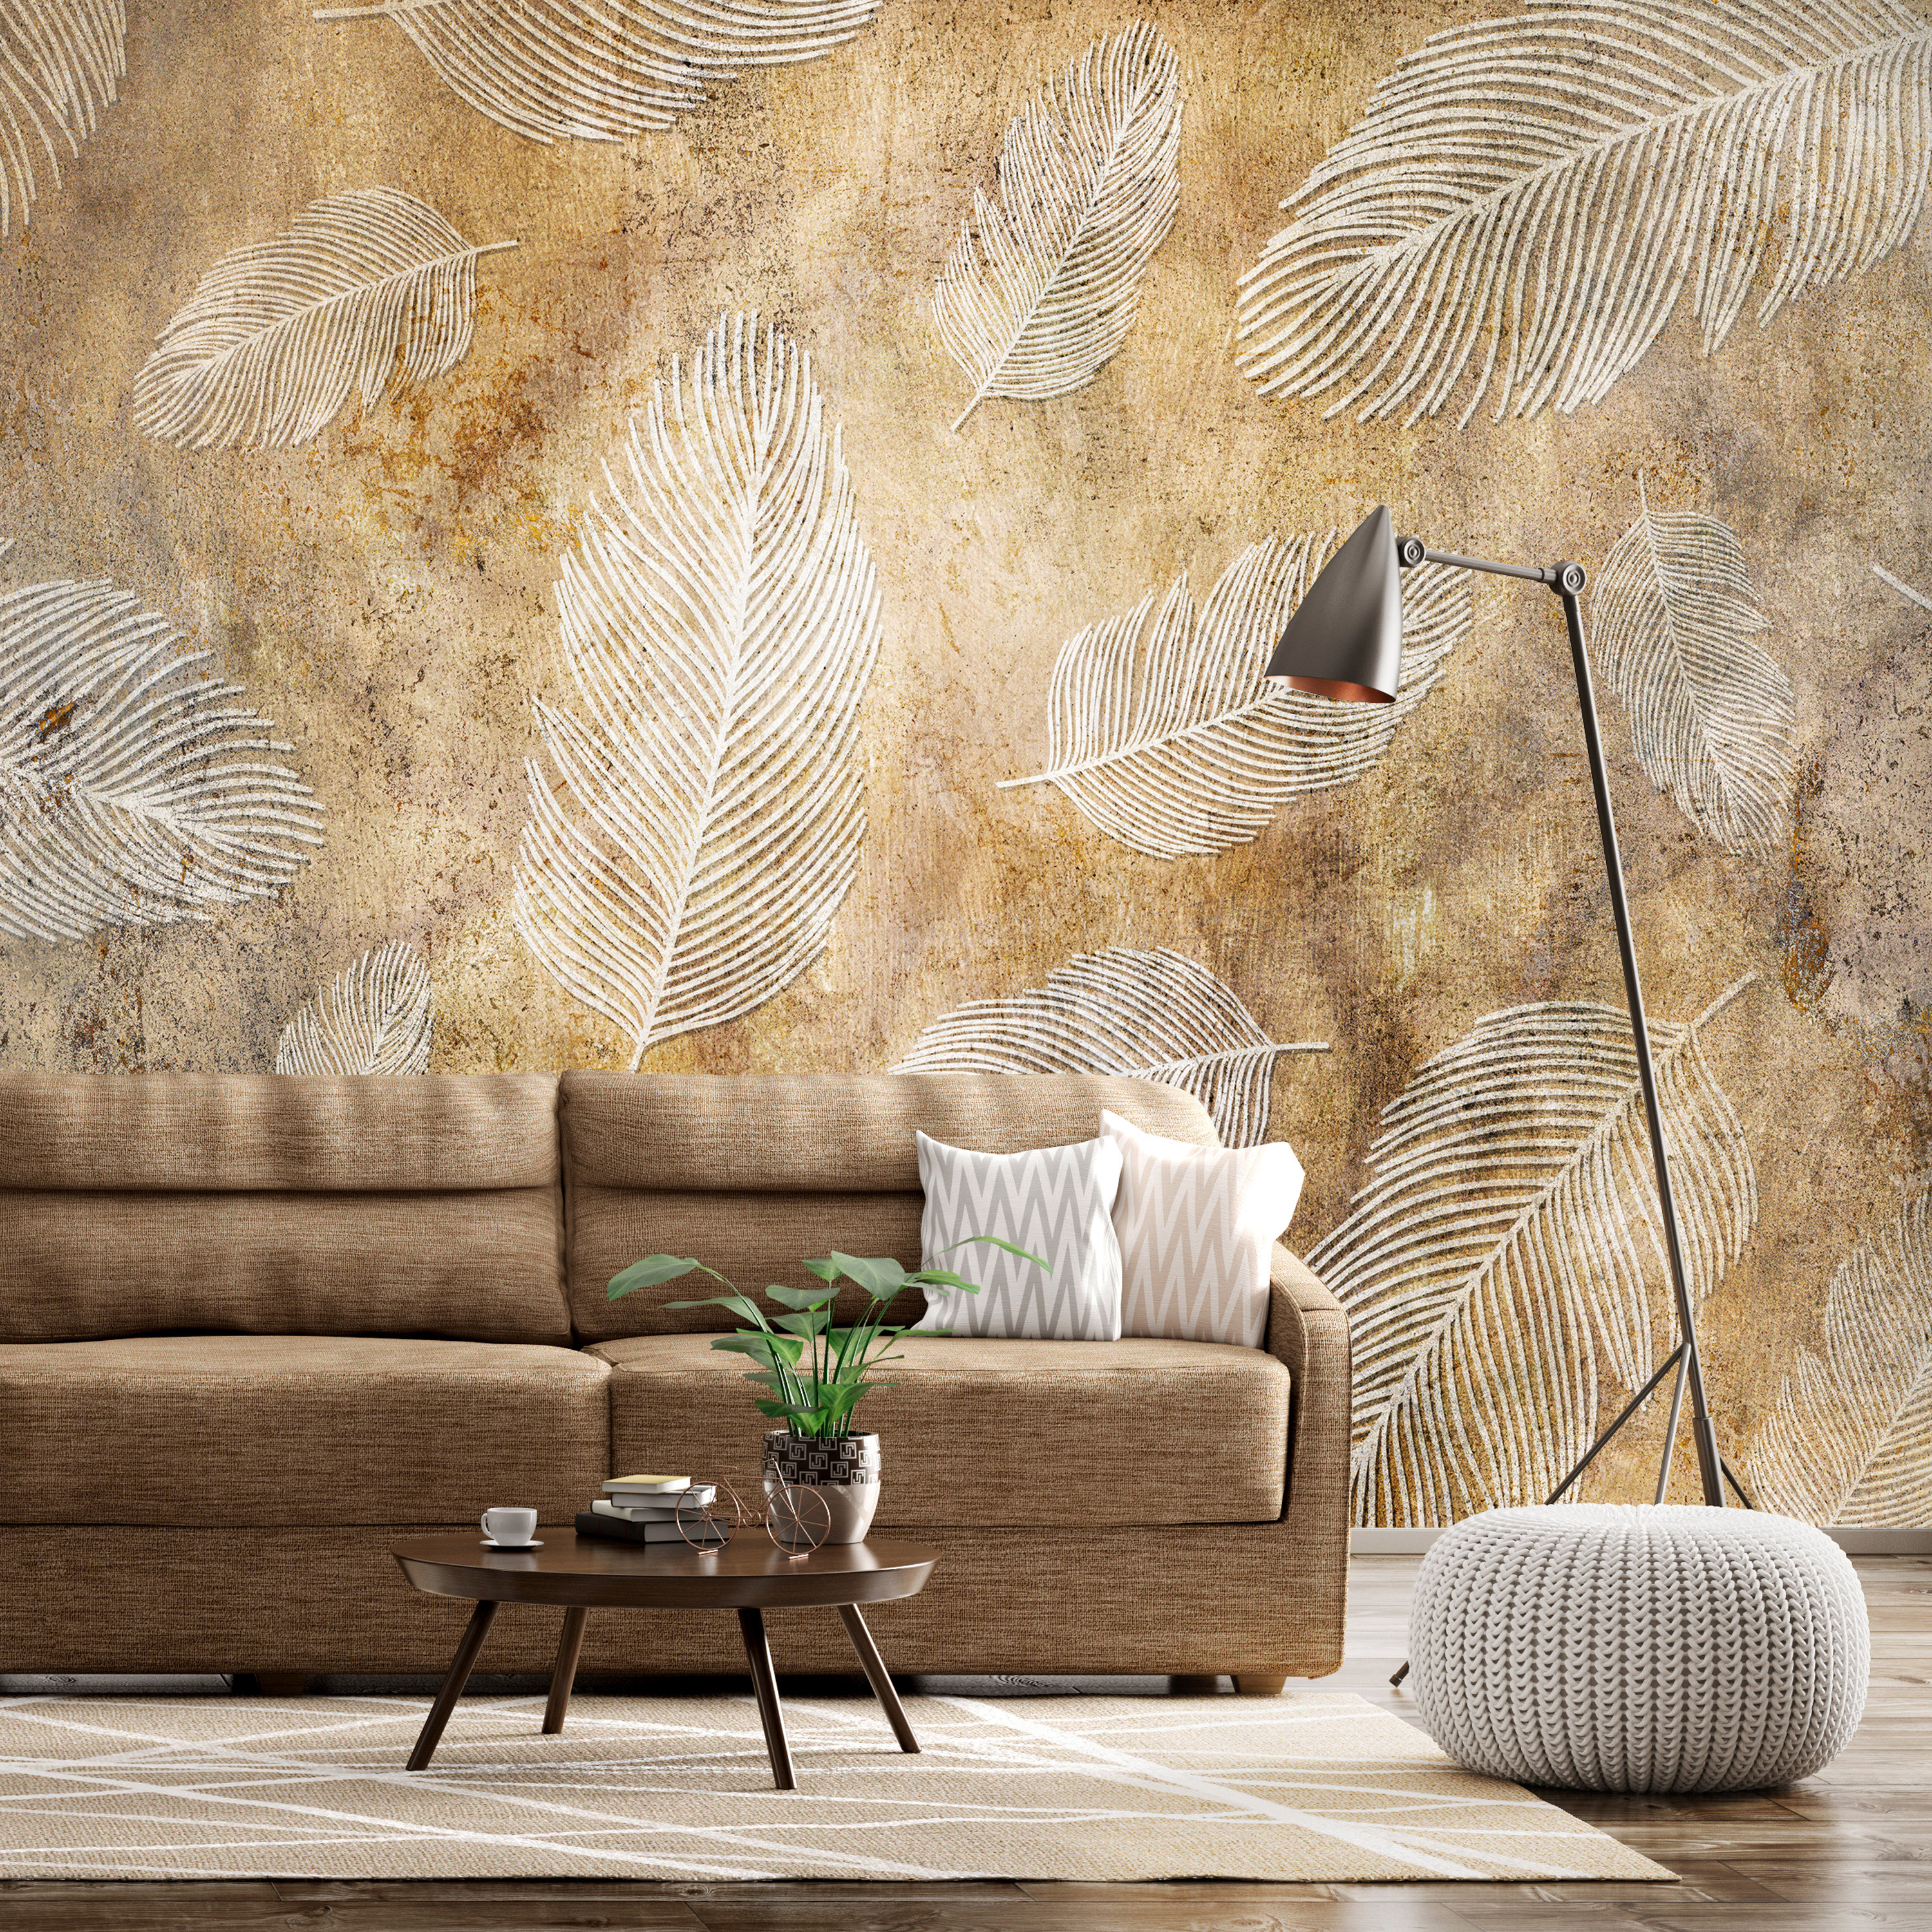 Self-adhesive Wallpaper - Flying Feathers - 98x70